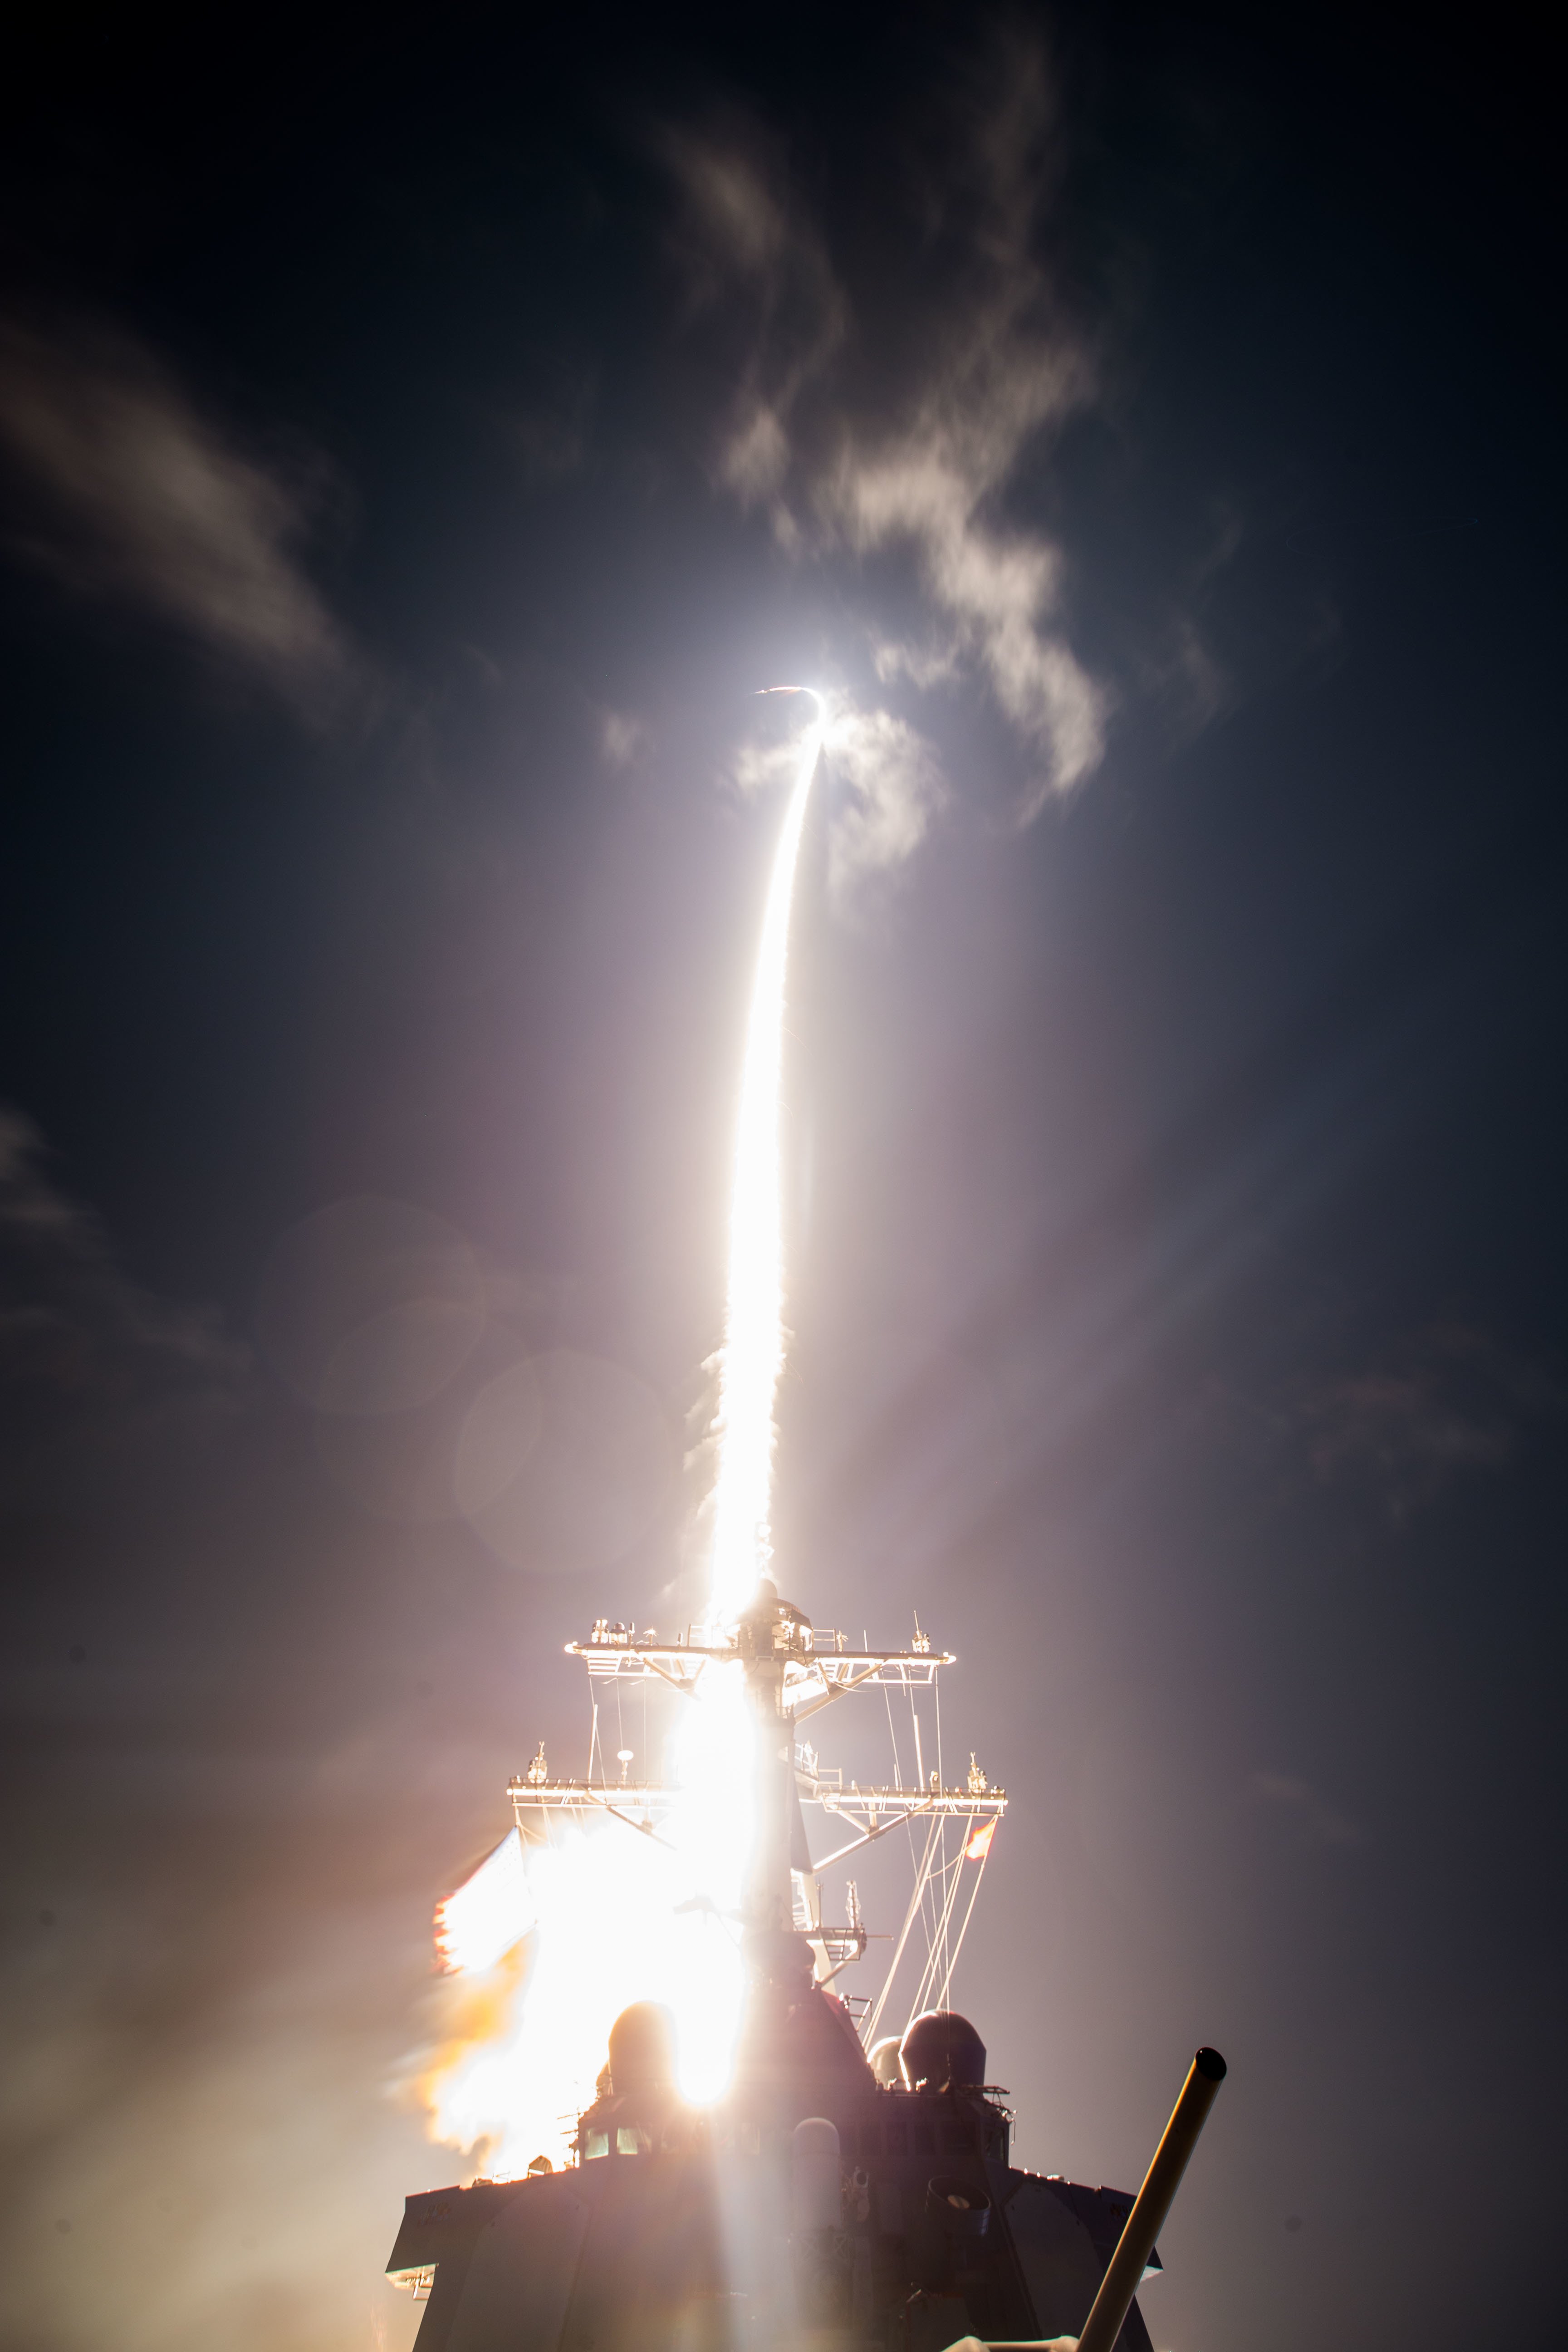 The U.S. Missile Defense Agency (MDA), the Japan Ministry of Defense (MoD), and U.S. Navy sailors aboard USS John Paul Jones (DDG 53) successfully conducted a flight test Feb. 3 (Hawaii Standard Time), resulting in the first intercept of a ballistic missile target using the Standard Missile-3 (SM-3) Block IIA off the west coast of Hawaii. MDA photo.